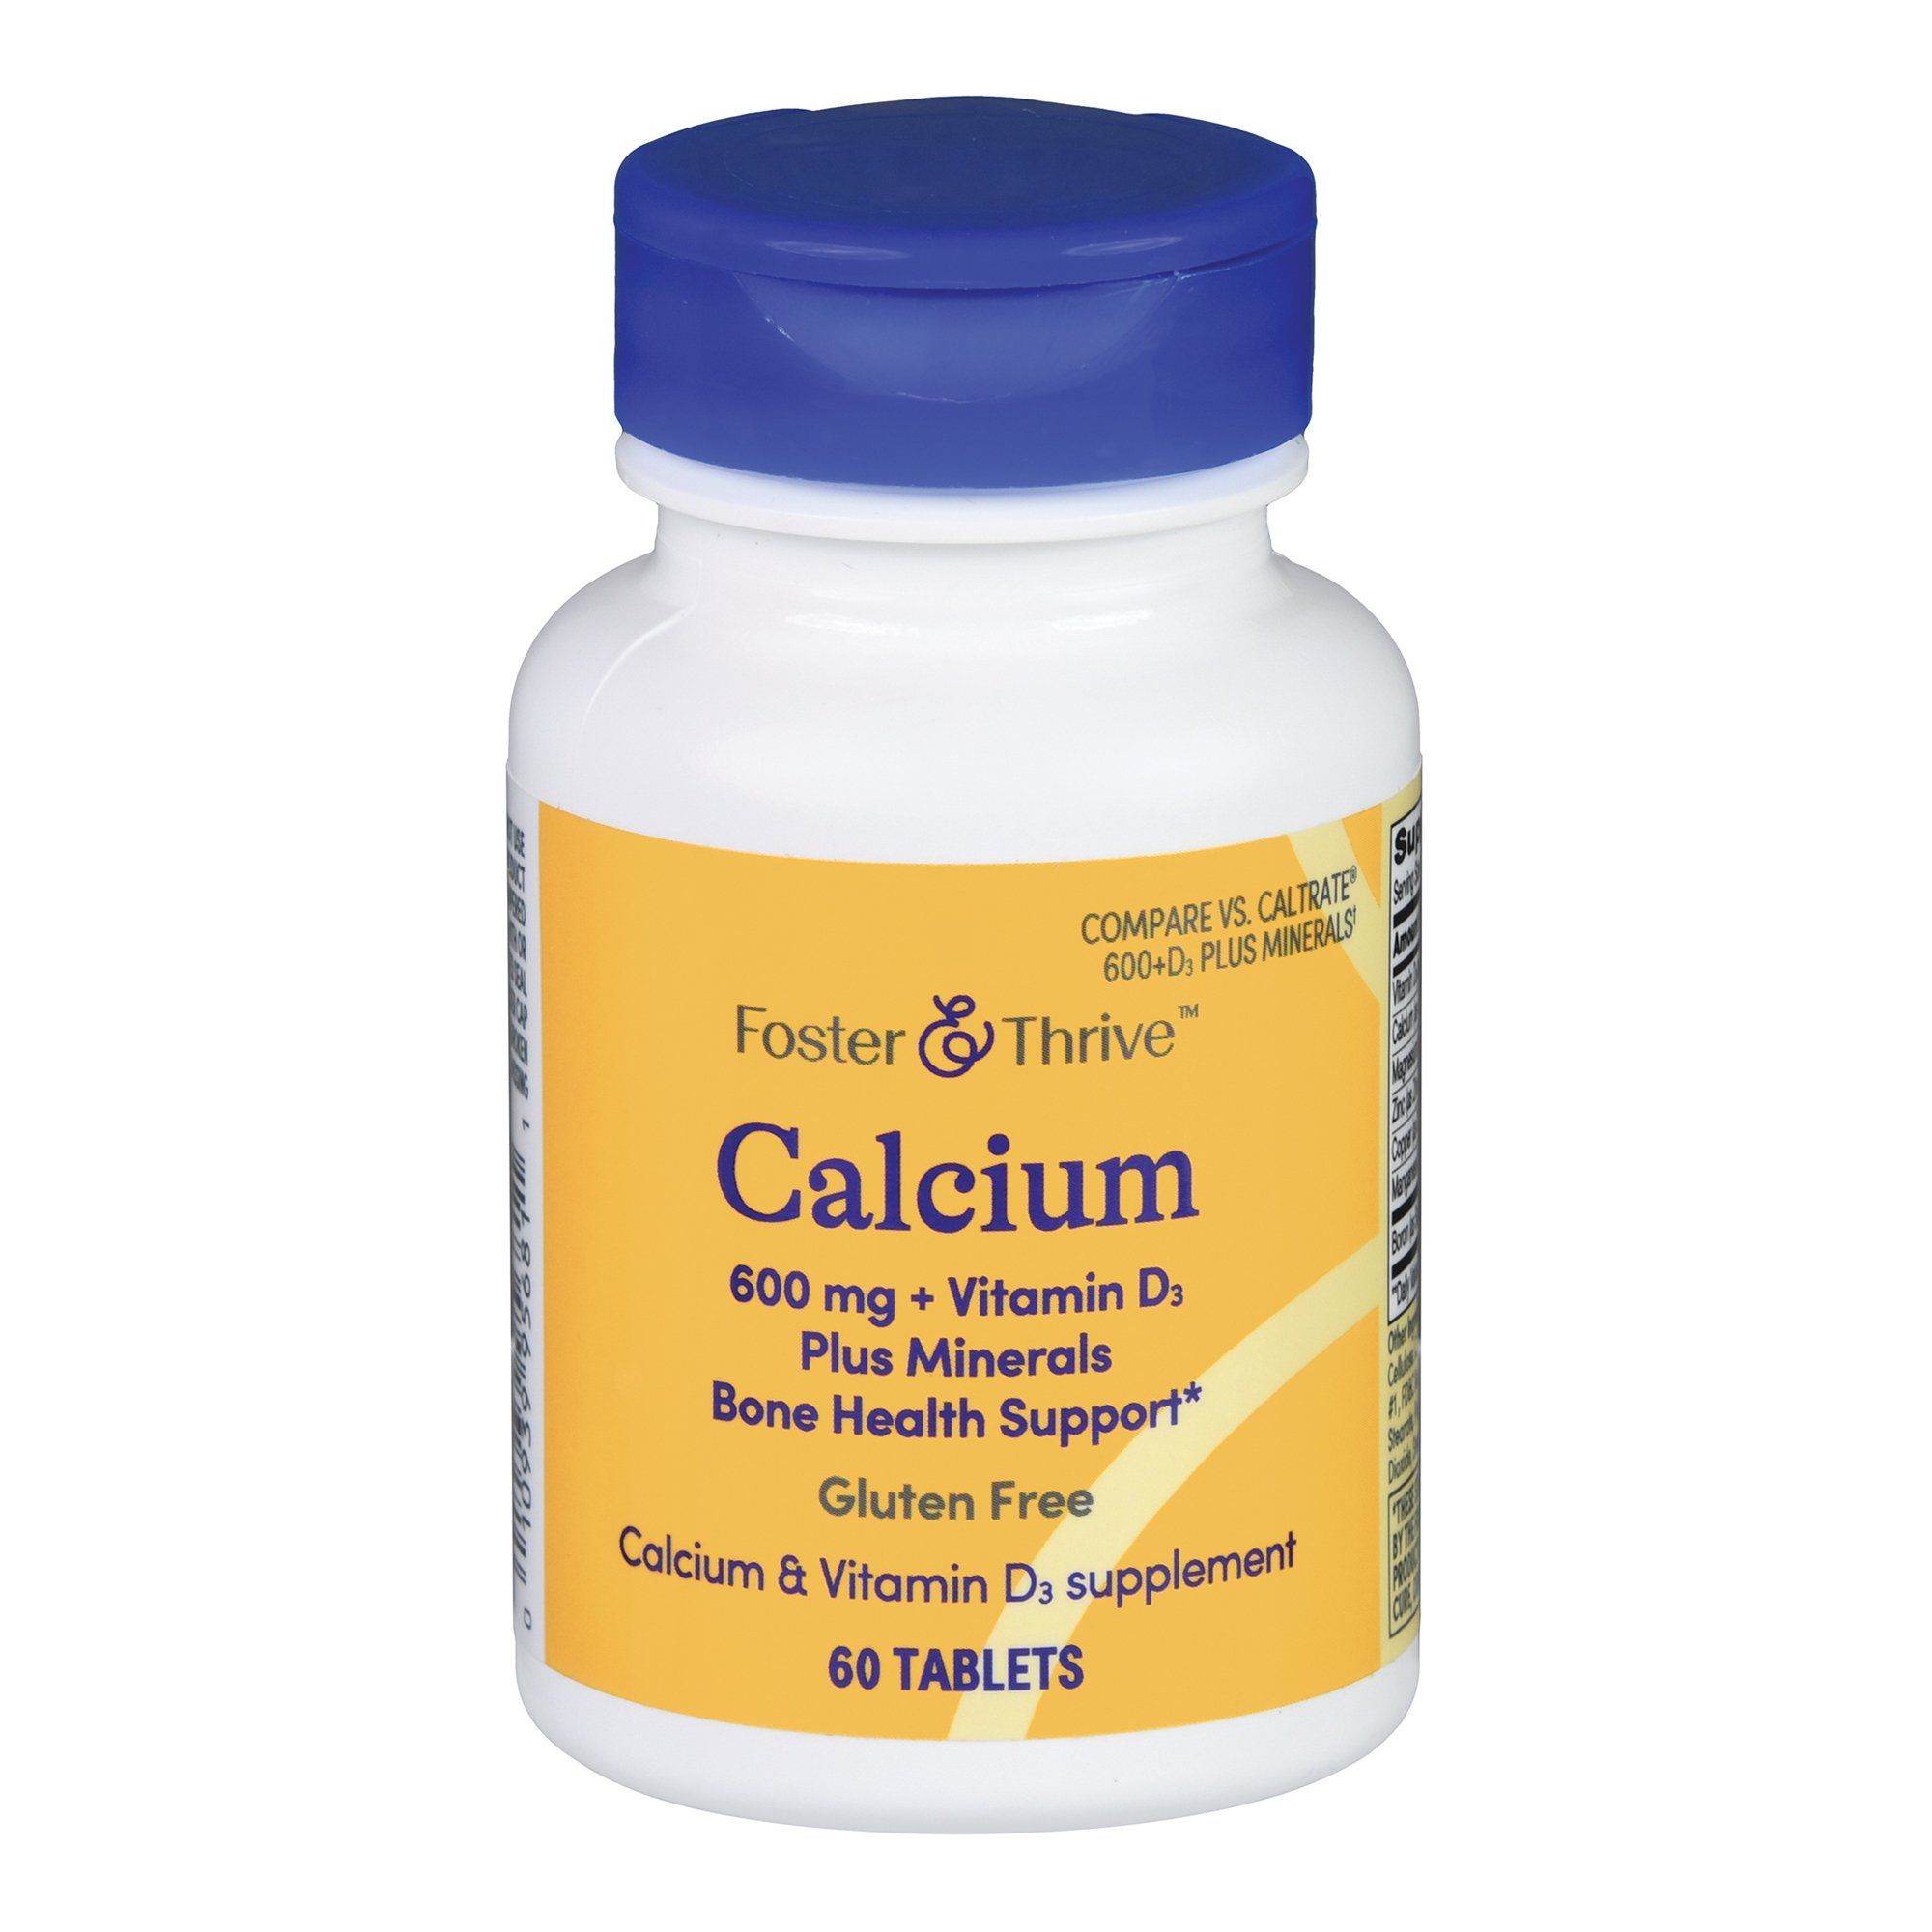 Foster & Thrive Calcium 600 mg + Vitamin D3 Plus Minerals Tablets - 60 ct